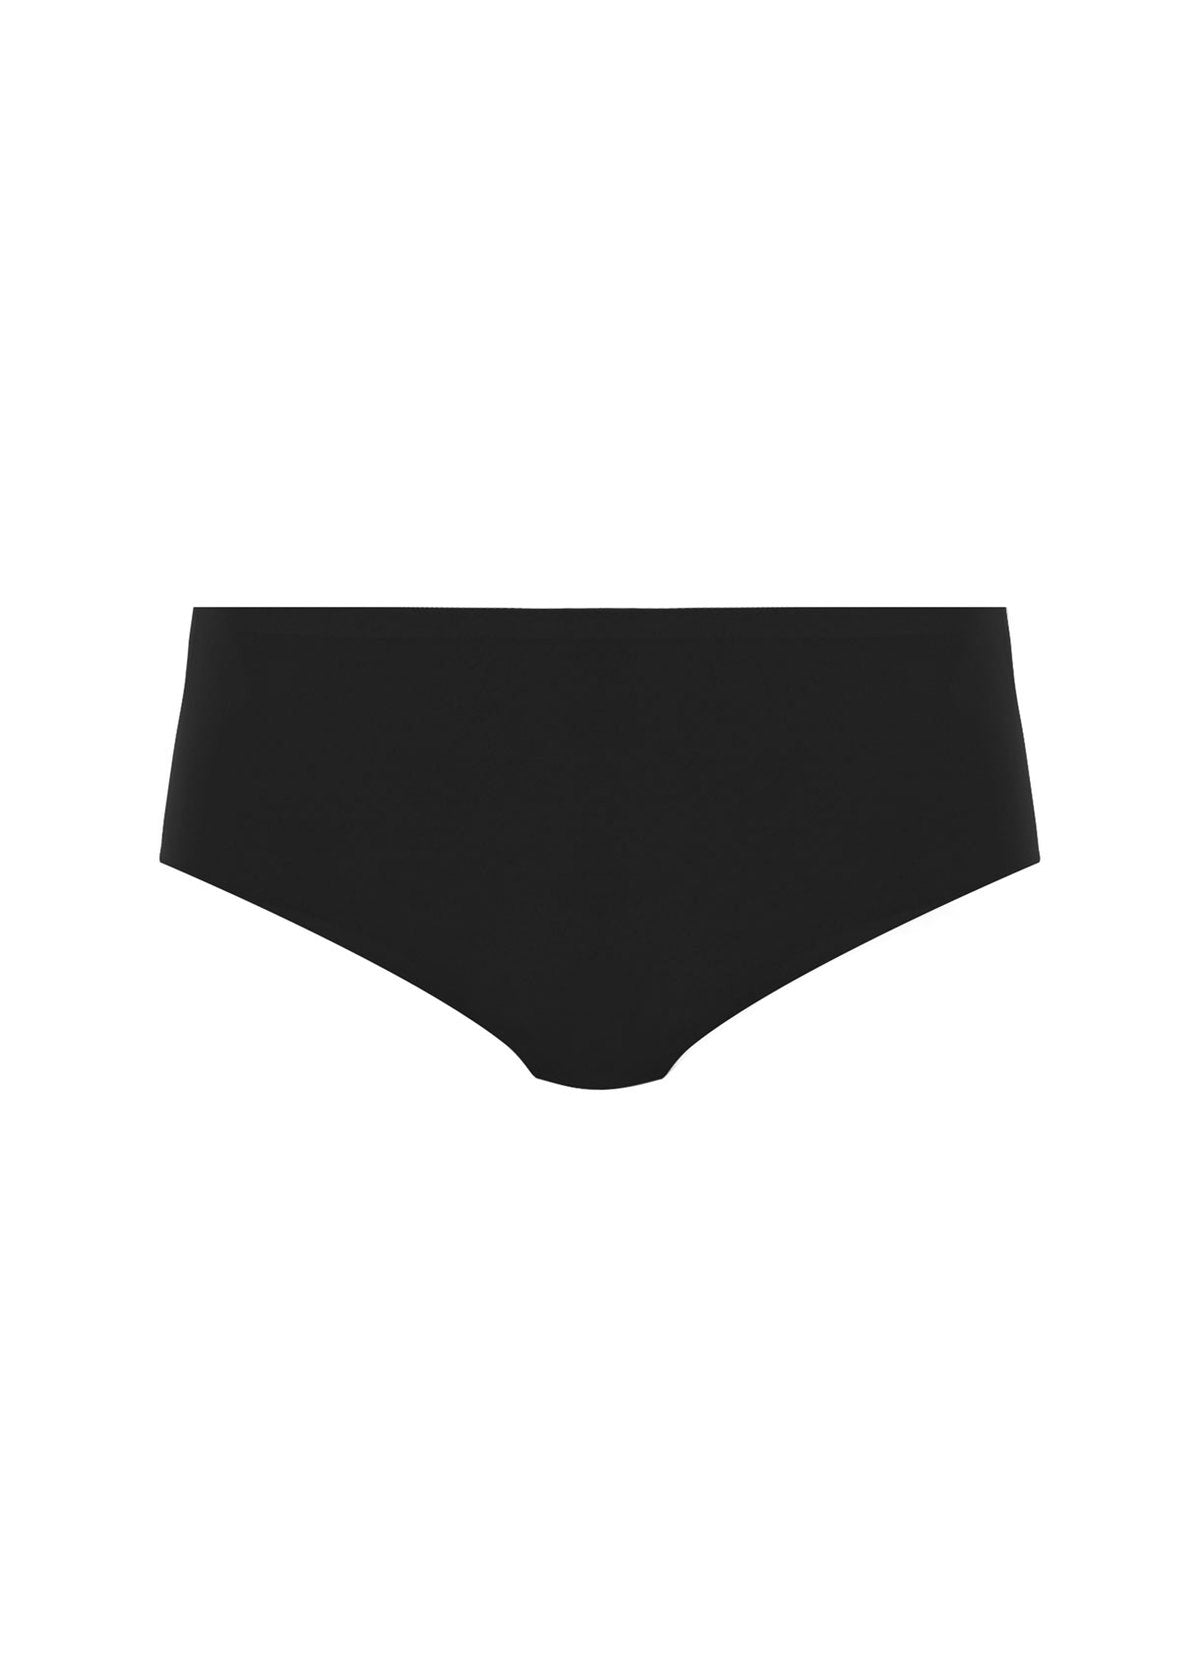 Smoothease Mid Brief One Size in Black front view product image